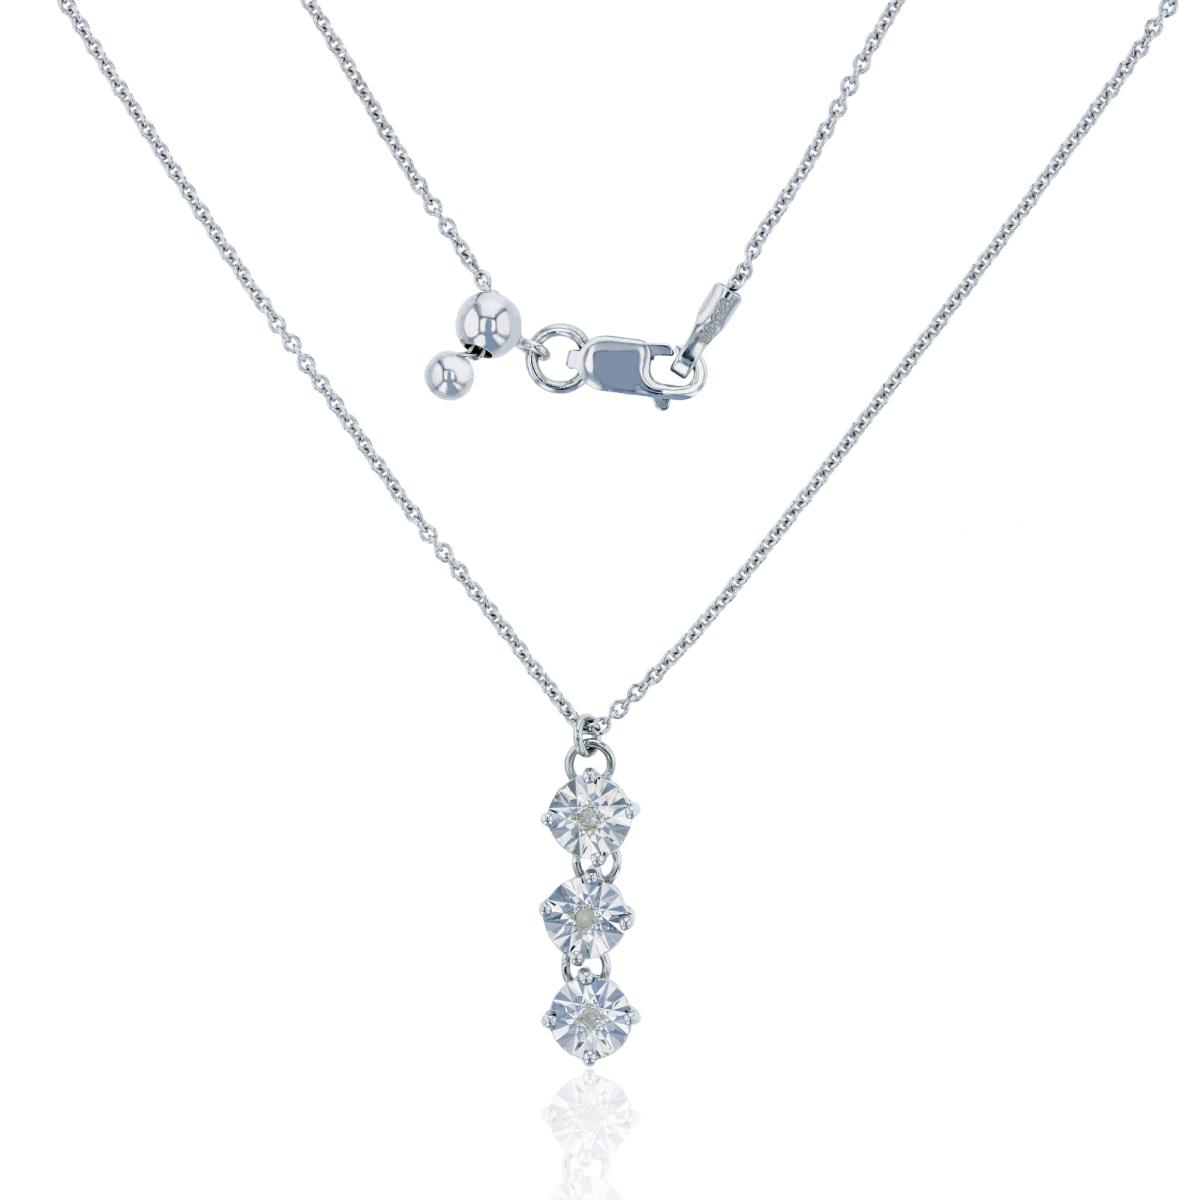 Sterling Silver Rhodium 0.5pt Diamond Accent 22" Dangling DC Circles Adjustable Necklace